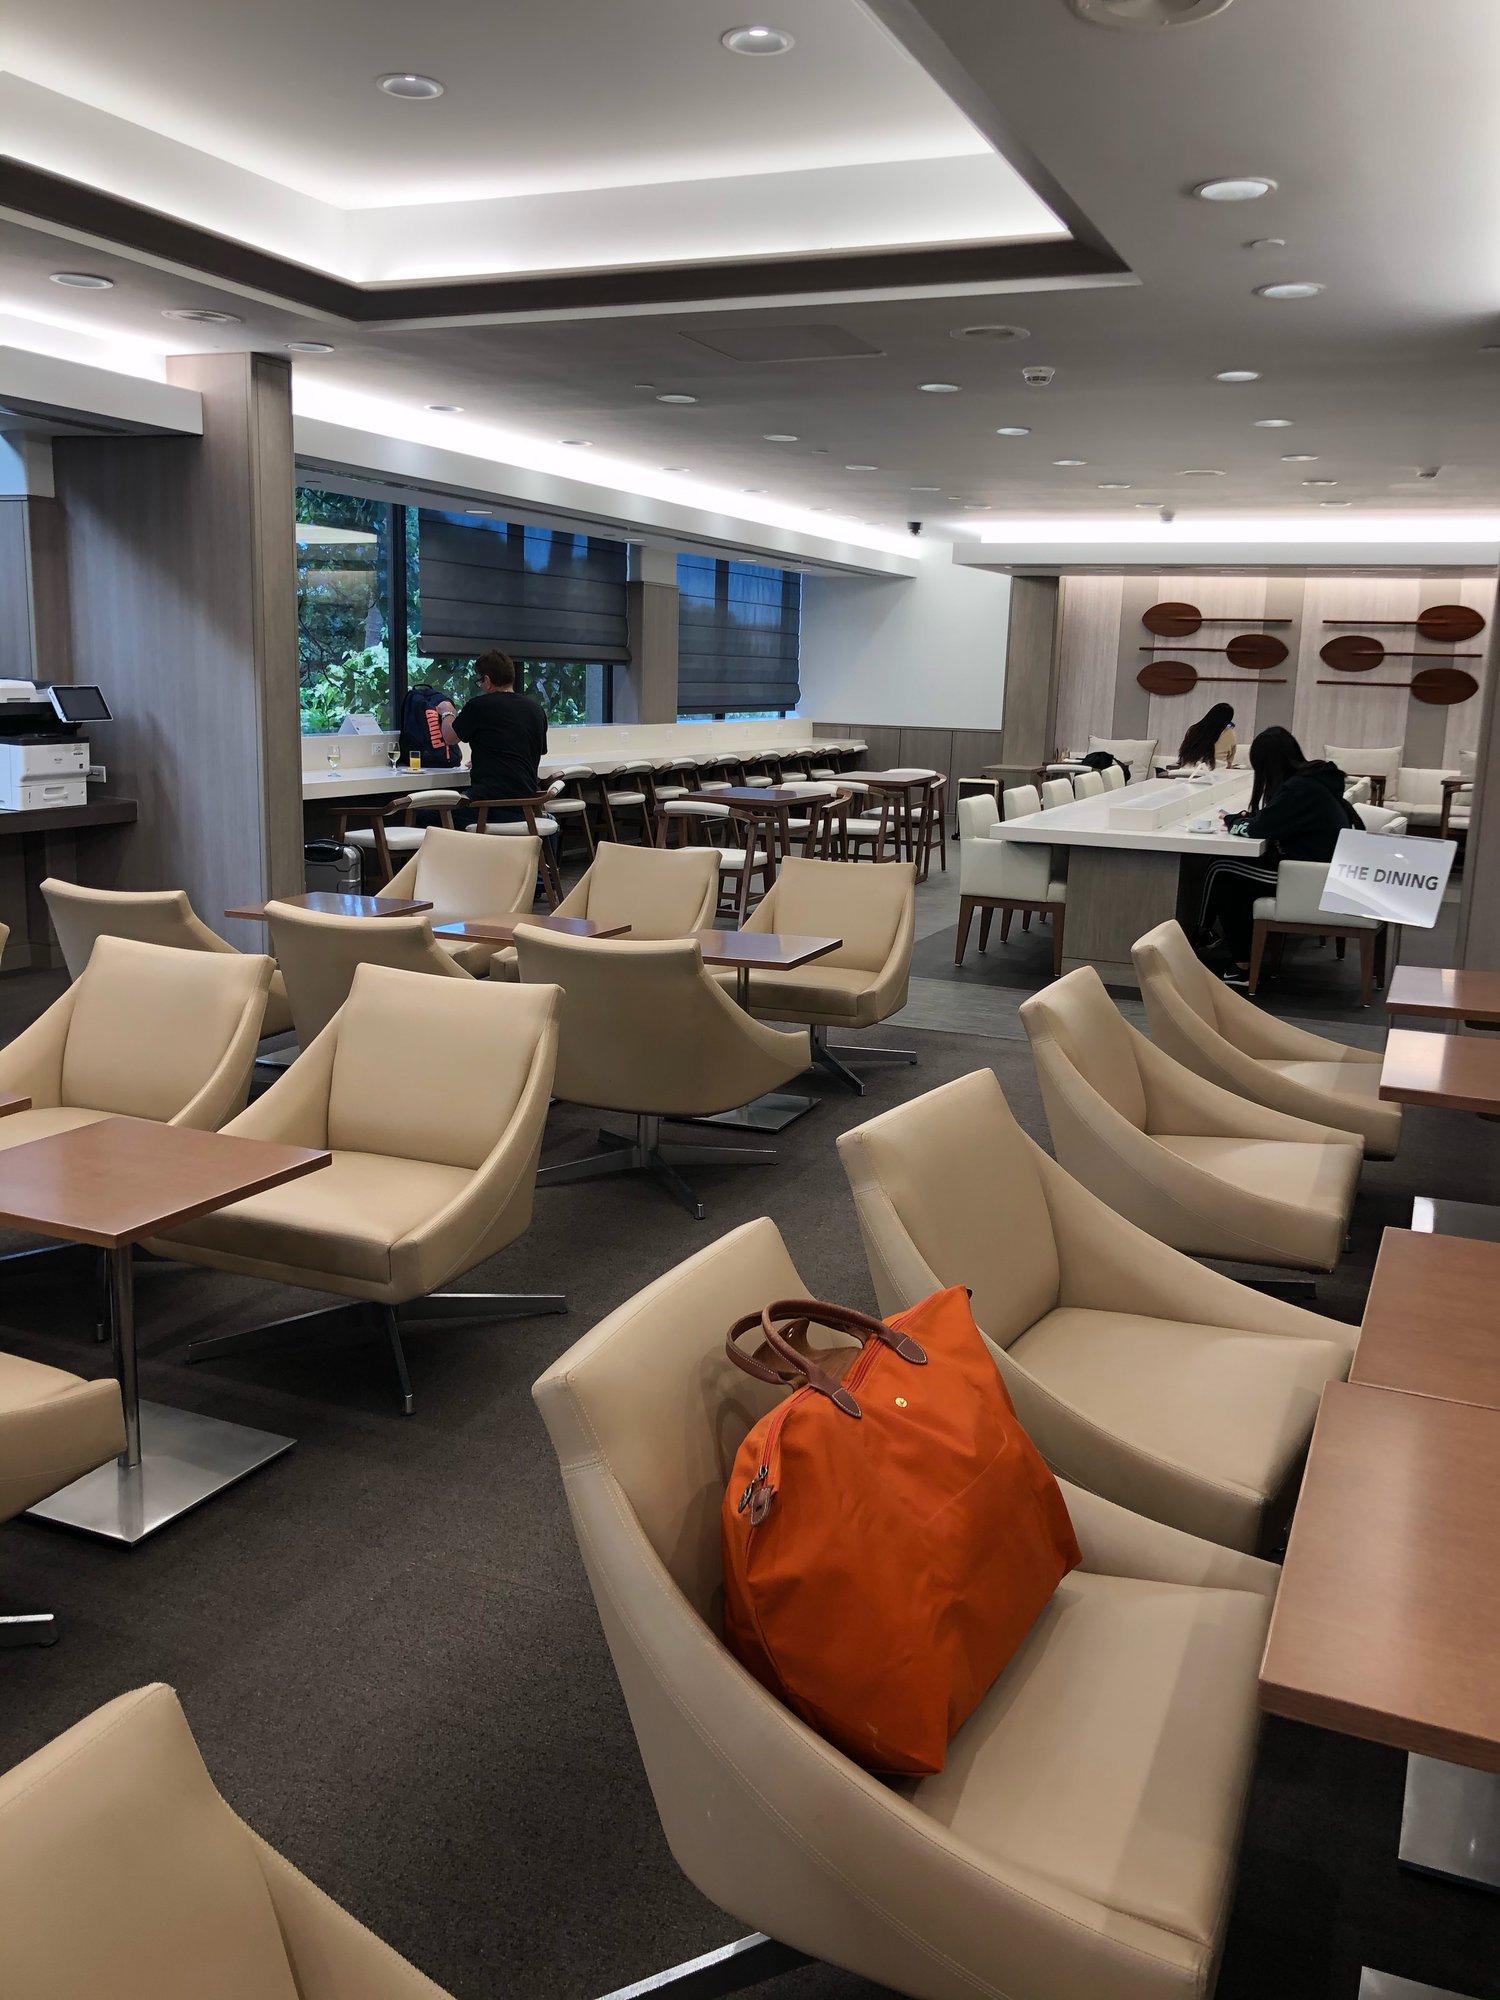 Japan Airlines JAL Sakura Lounge / American Airlines Admirals Club image 6 of 11